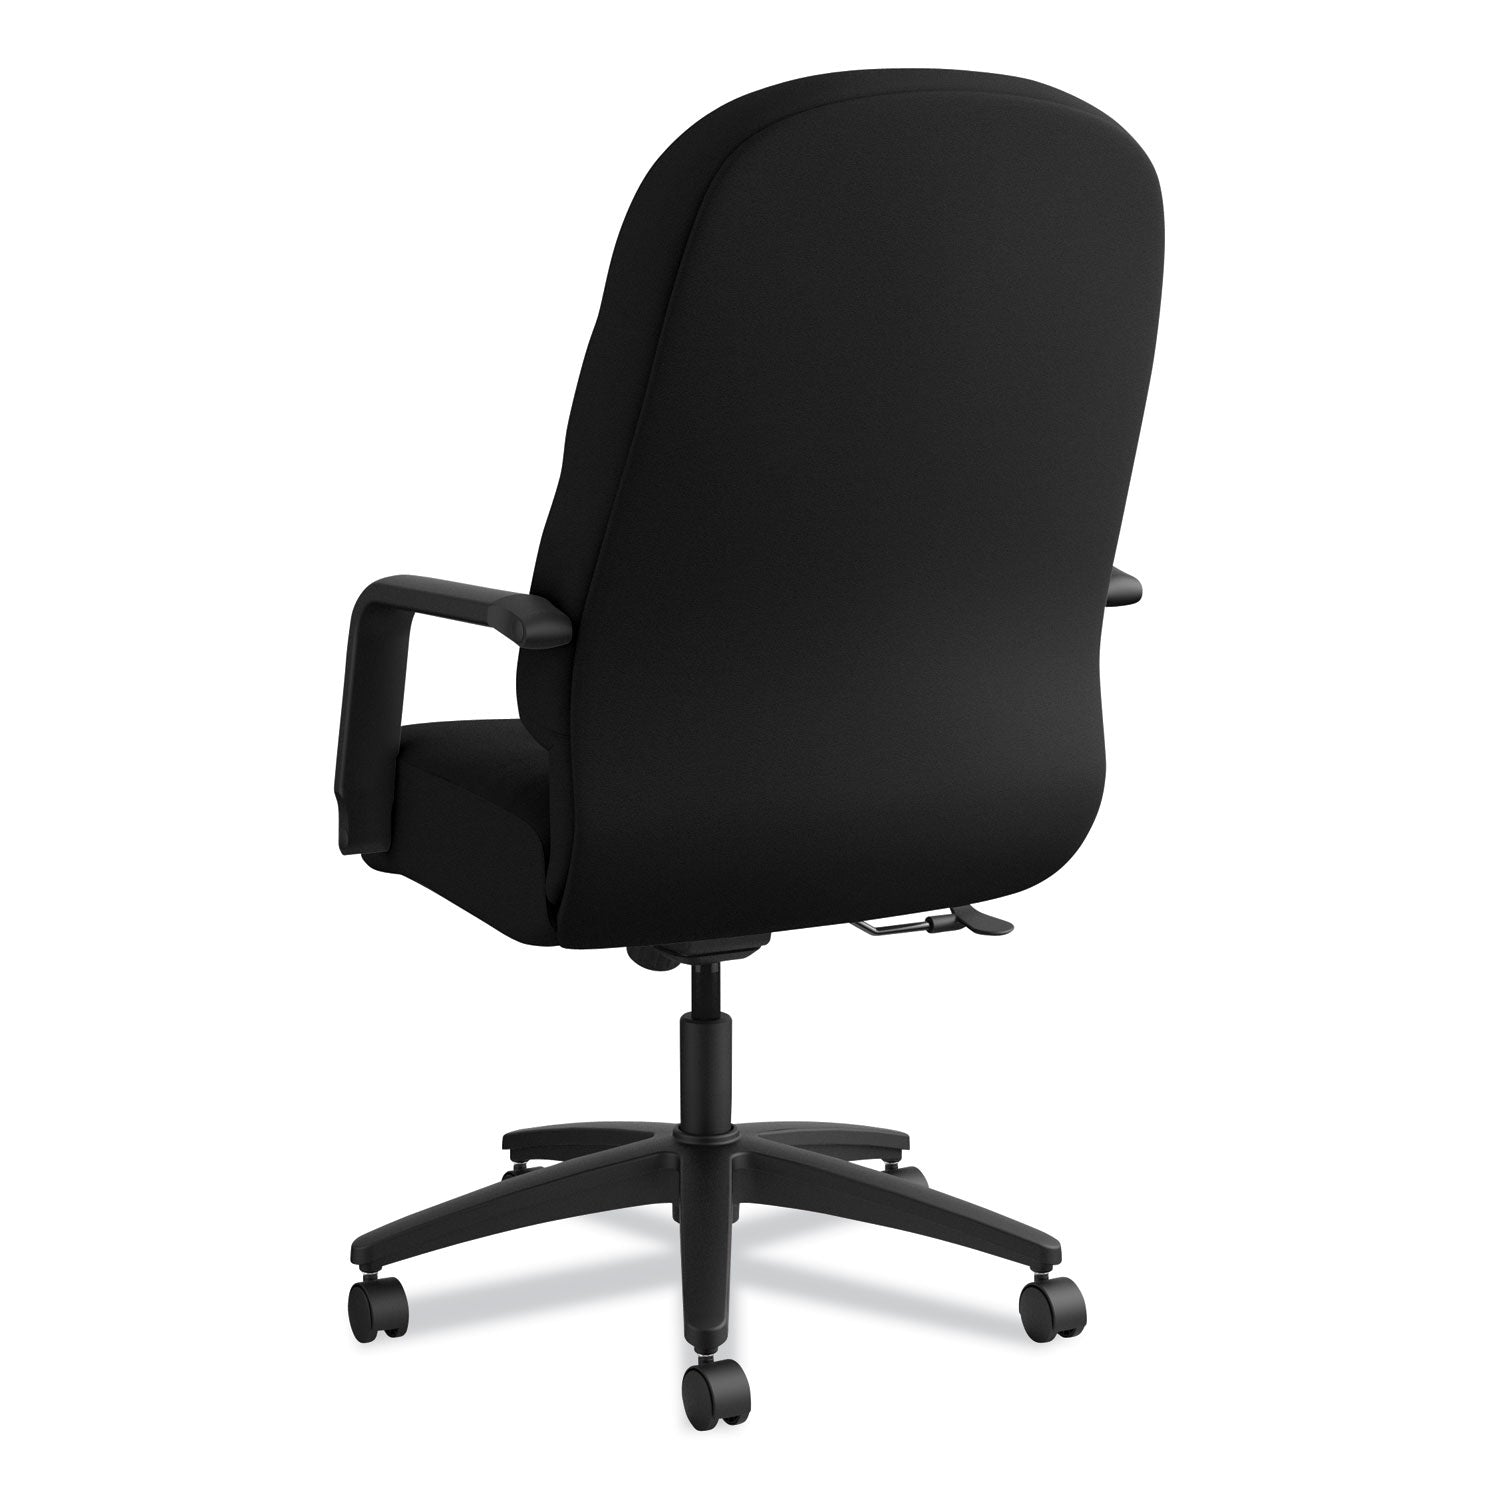 Pillow-Soft 2090 Series Executive High-Back Swivel/Tilt Chair, Supports Up to 300 lb, 17" to 21" Seat Height, Black - 8